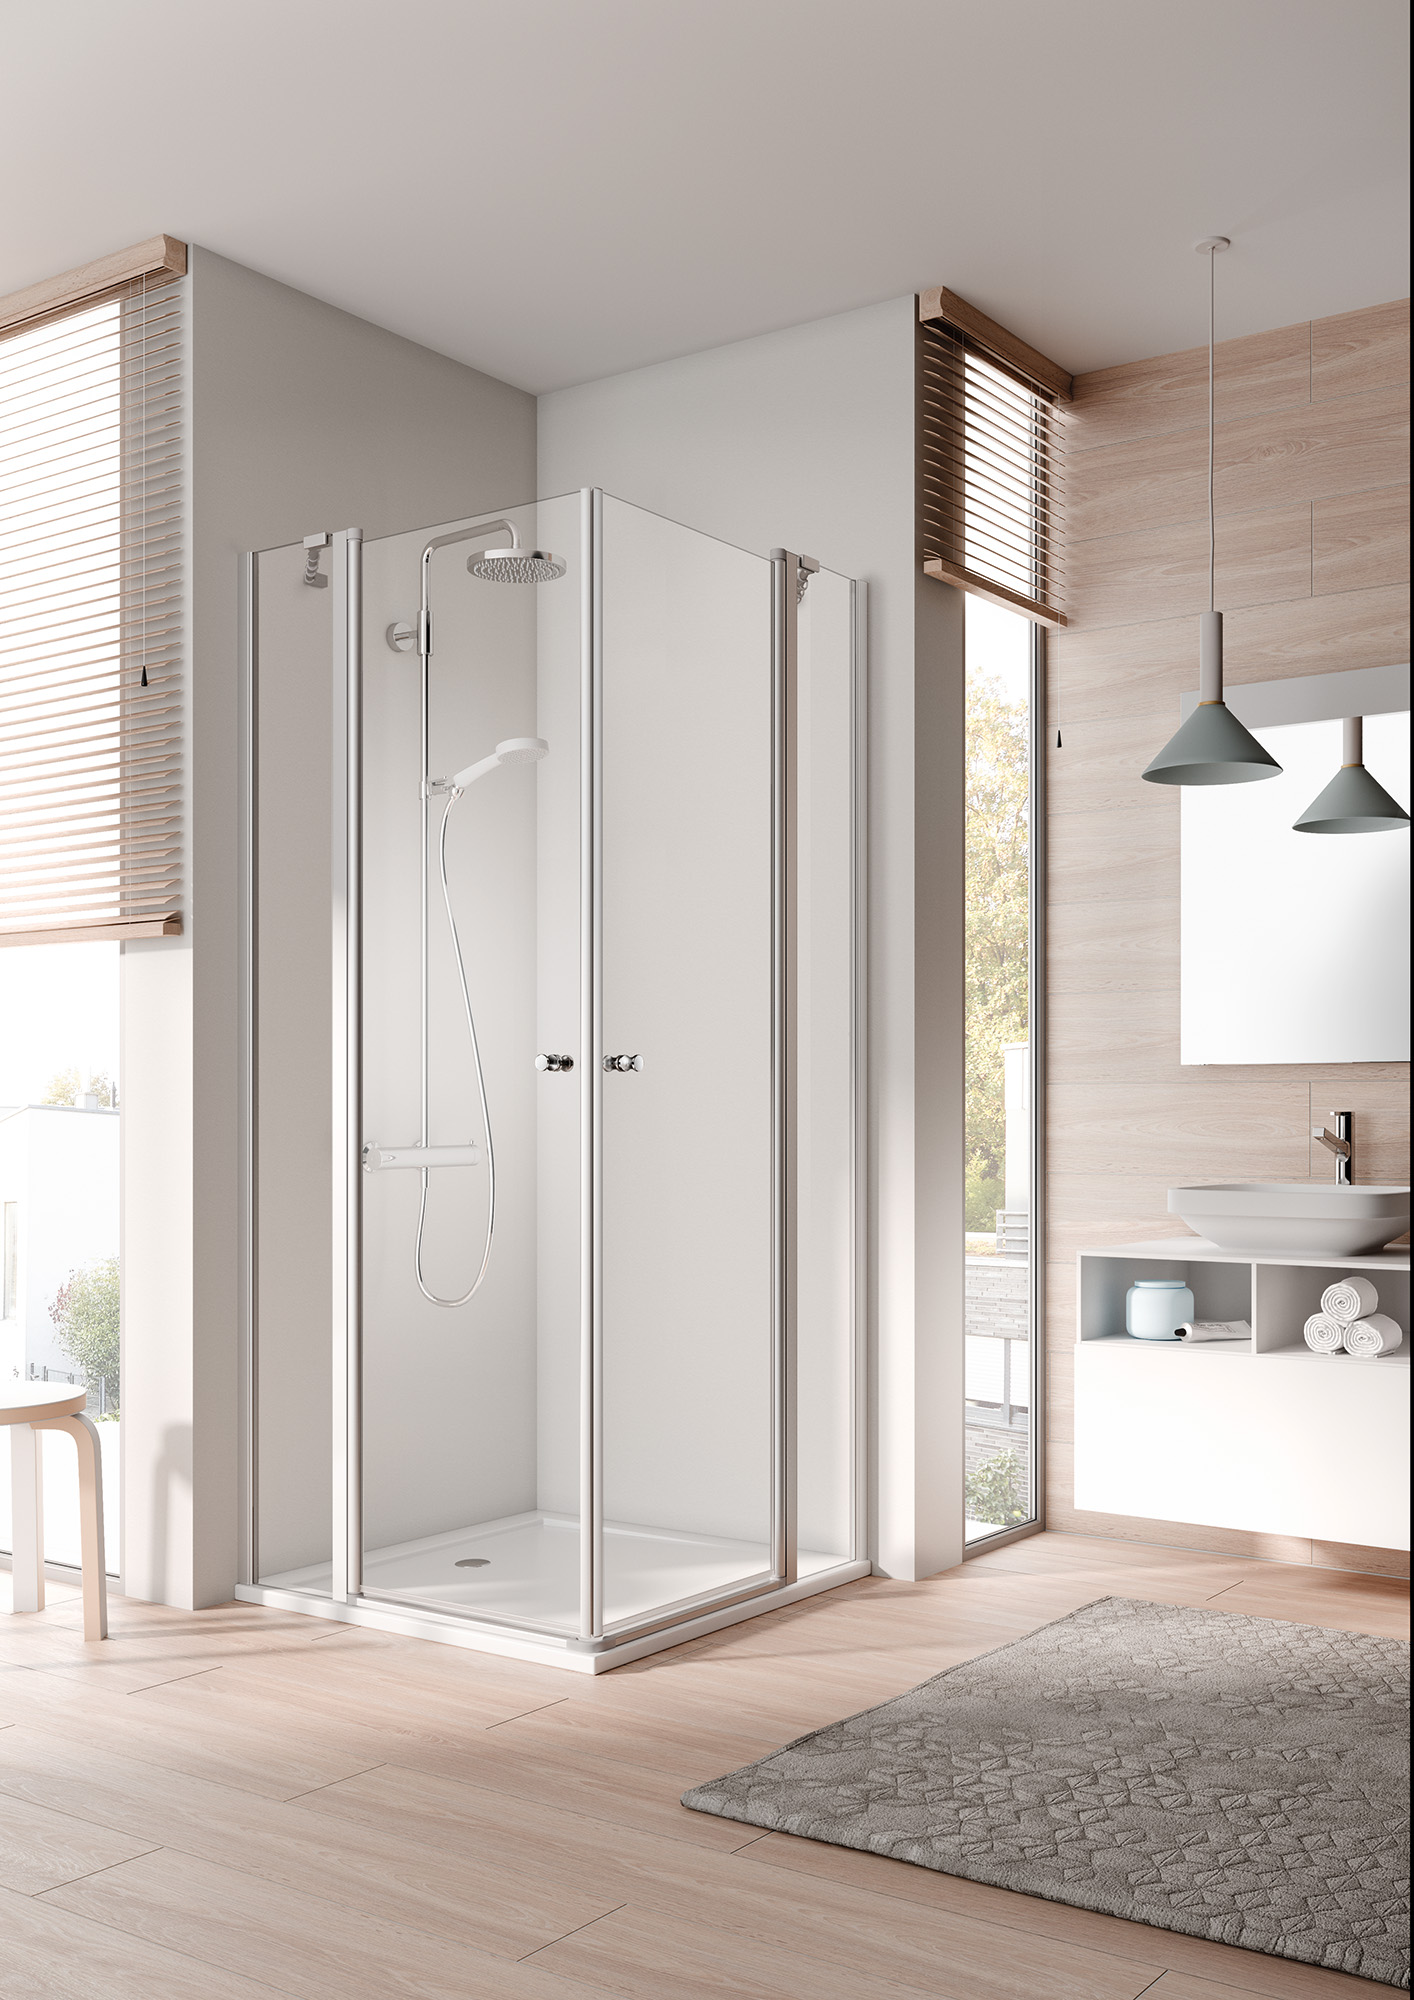 Kermi profile shower enclosure, IBIZA 2000 two-part corner entry (two-part hinged doors with fixed panels) – half part